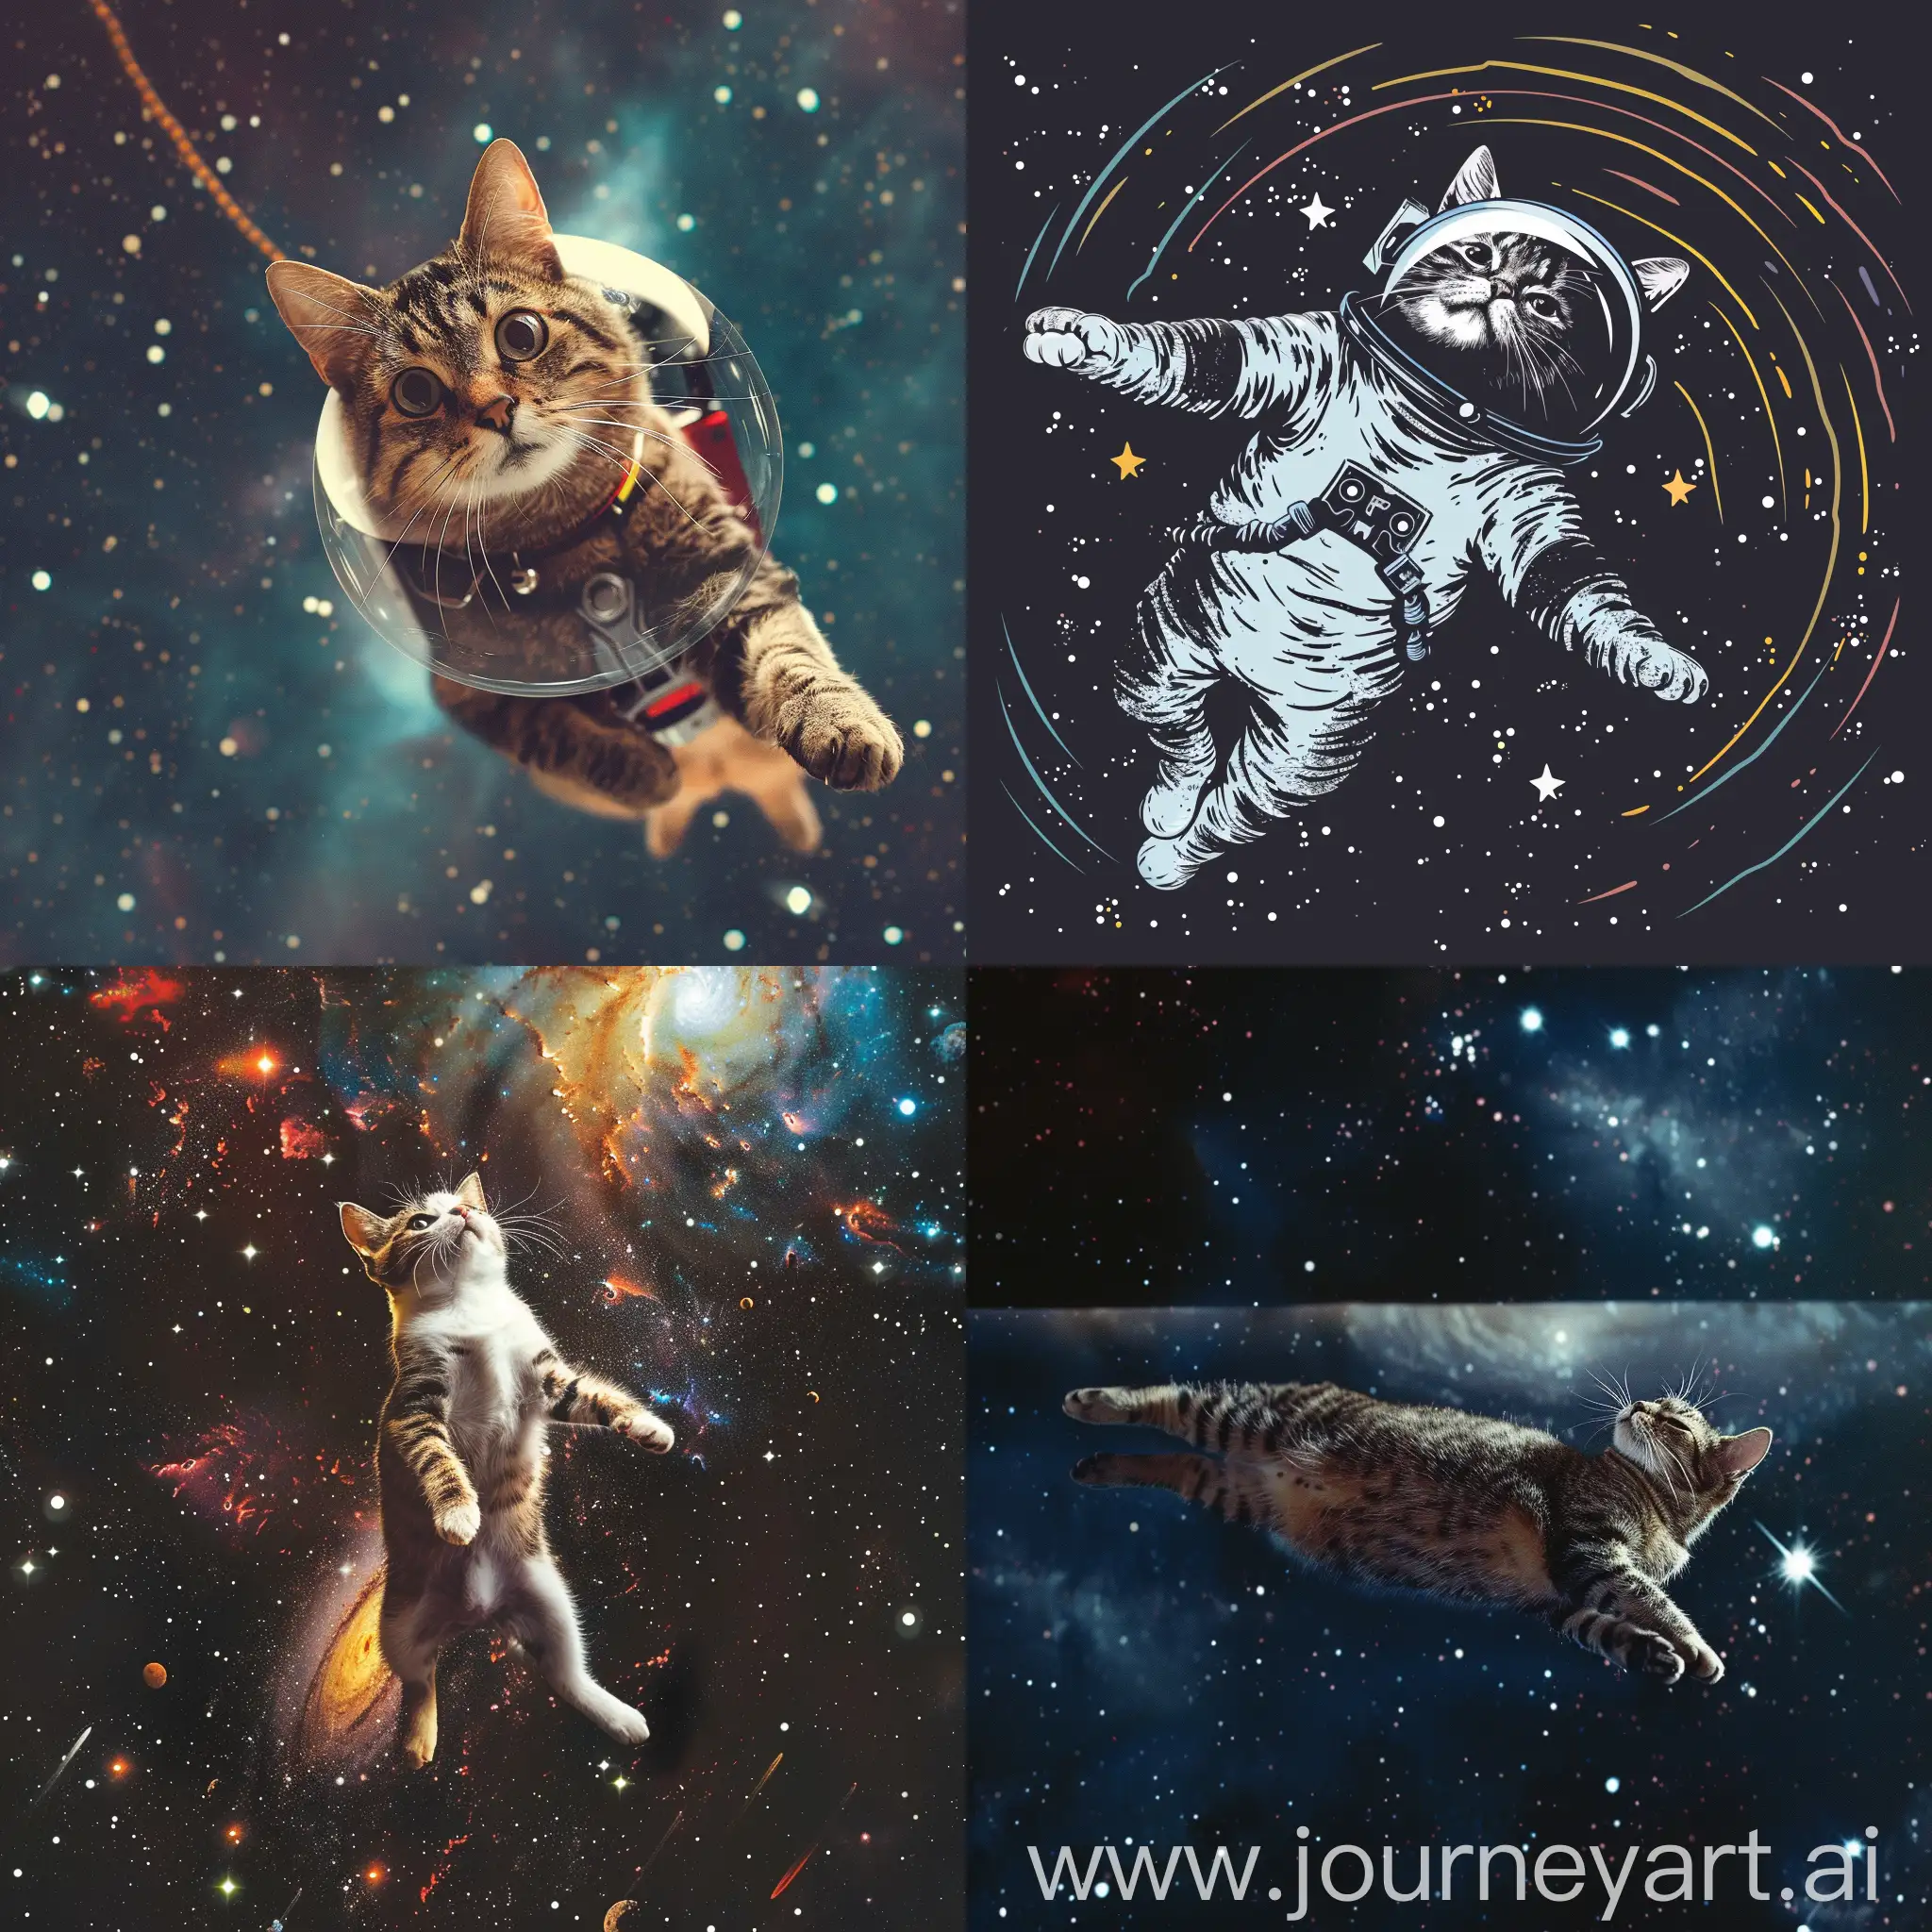 Playful-Cat-Floating-in-Galactic-Serenity